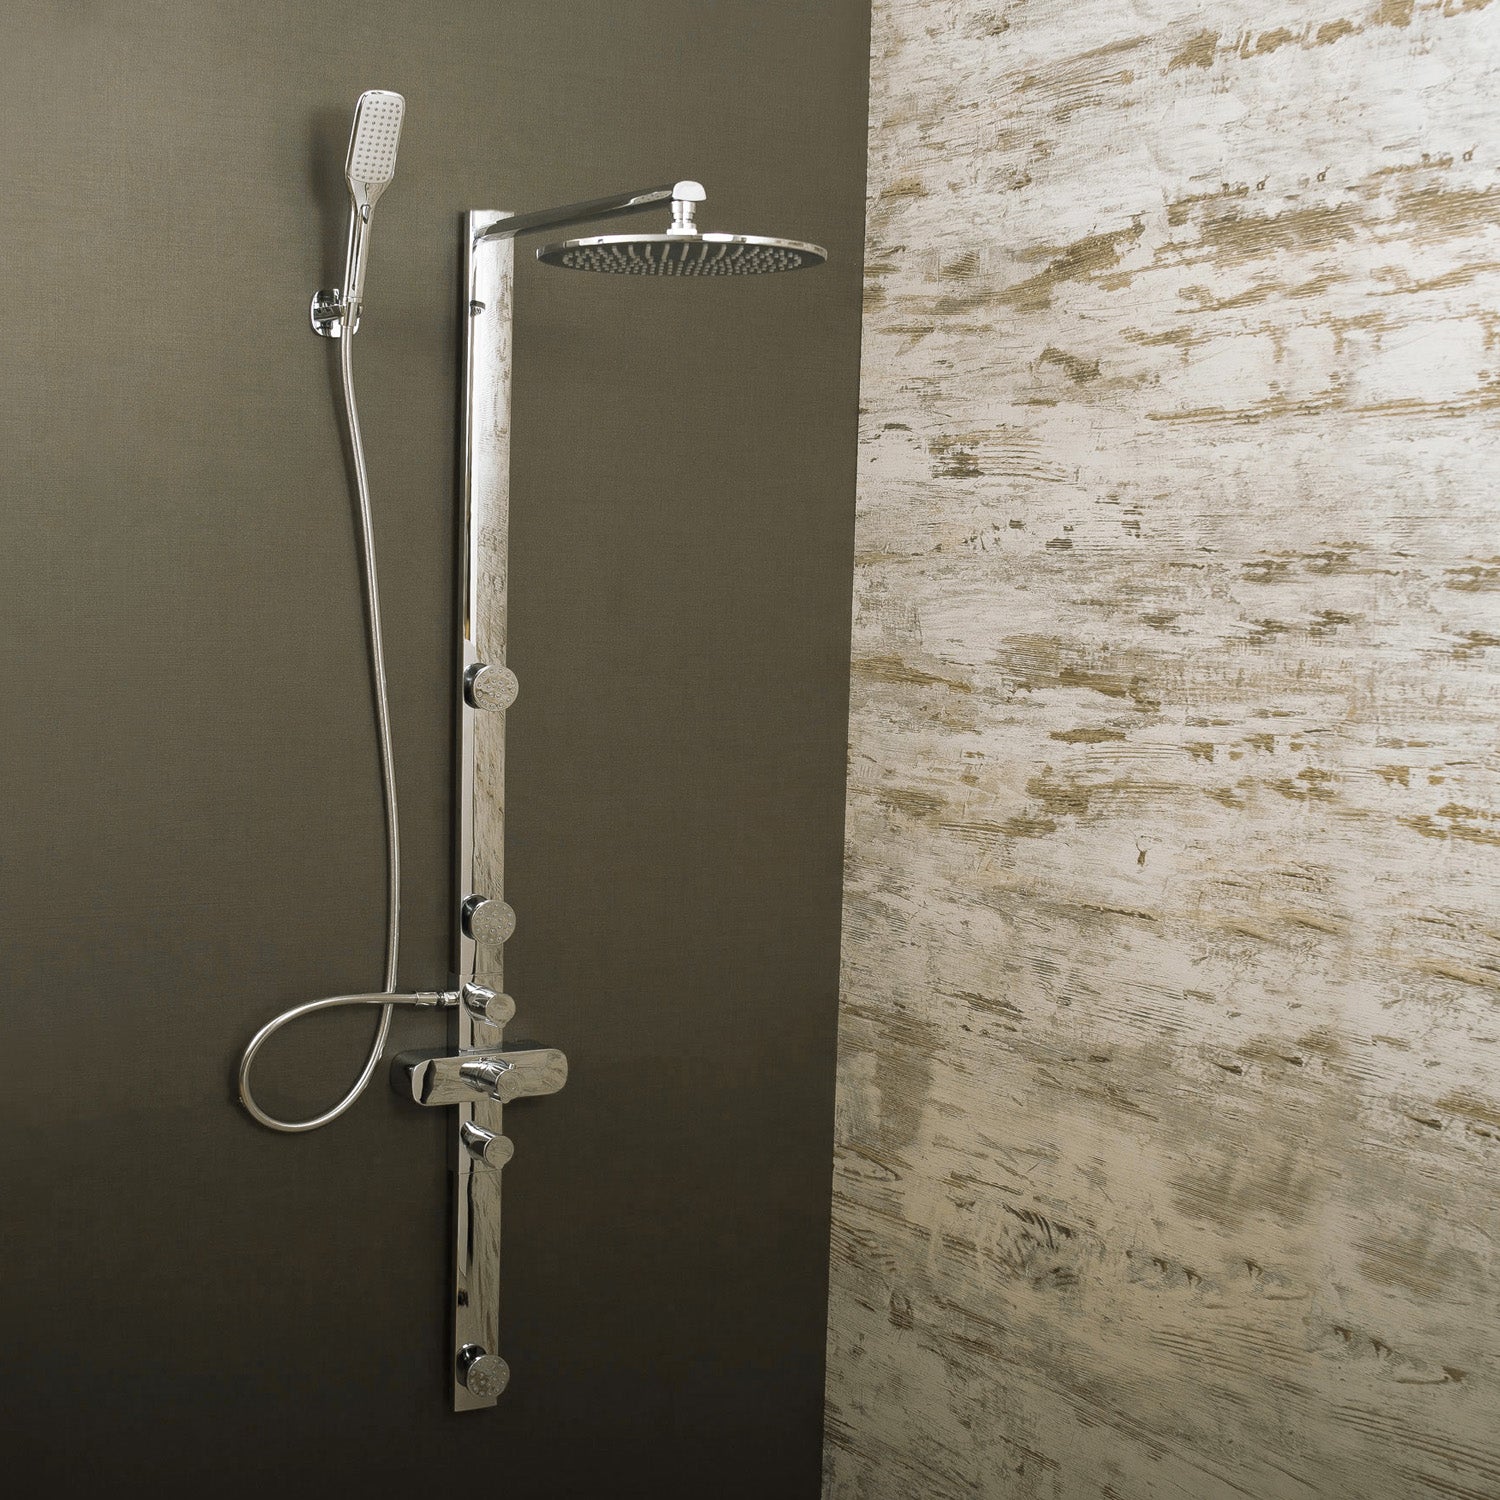 DAX Shower System with Round Rain Shower Head, 3 Nozzles, Hand Shower and Individual Controls, Wall Mount, Brass Body, Chrome Finish (DAX-FH8452-675)